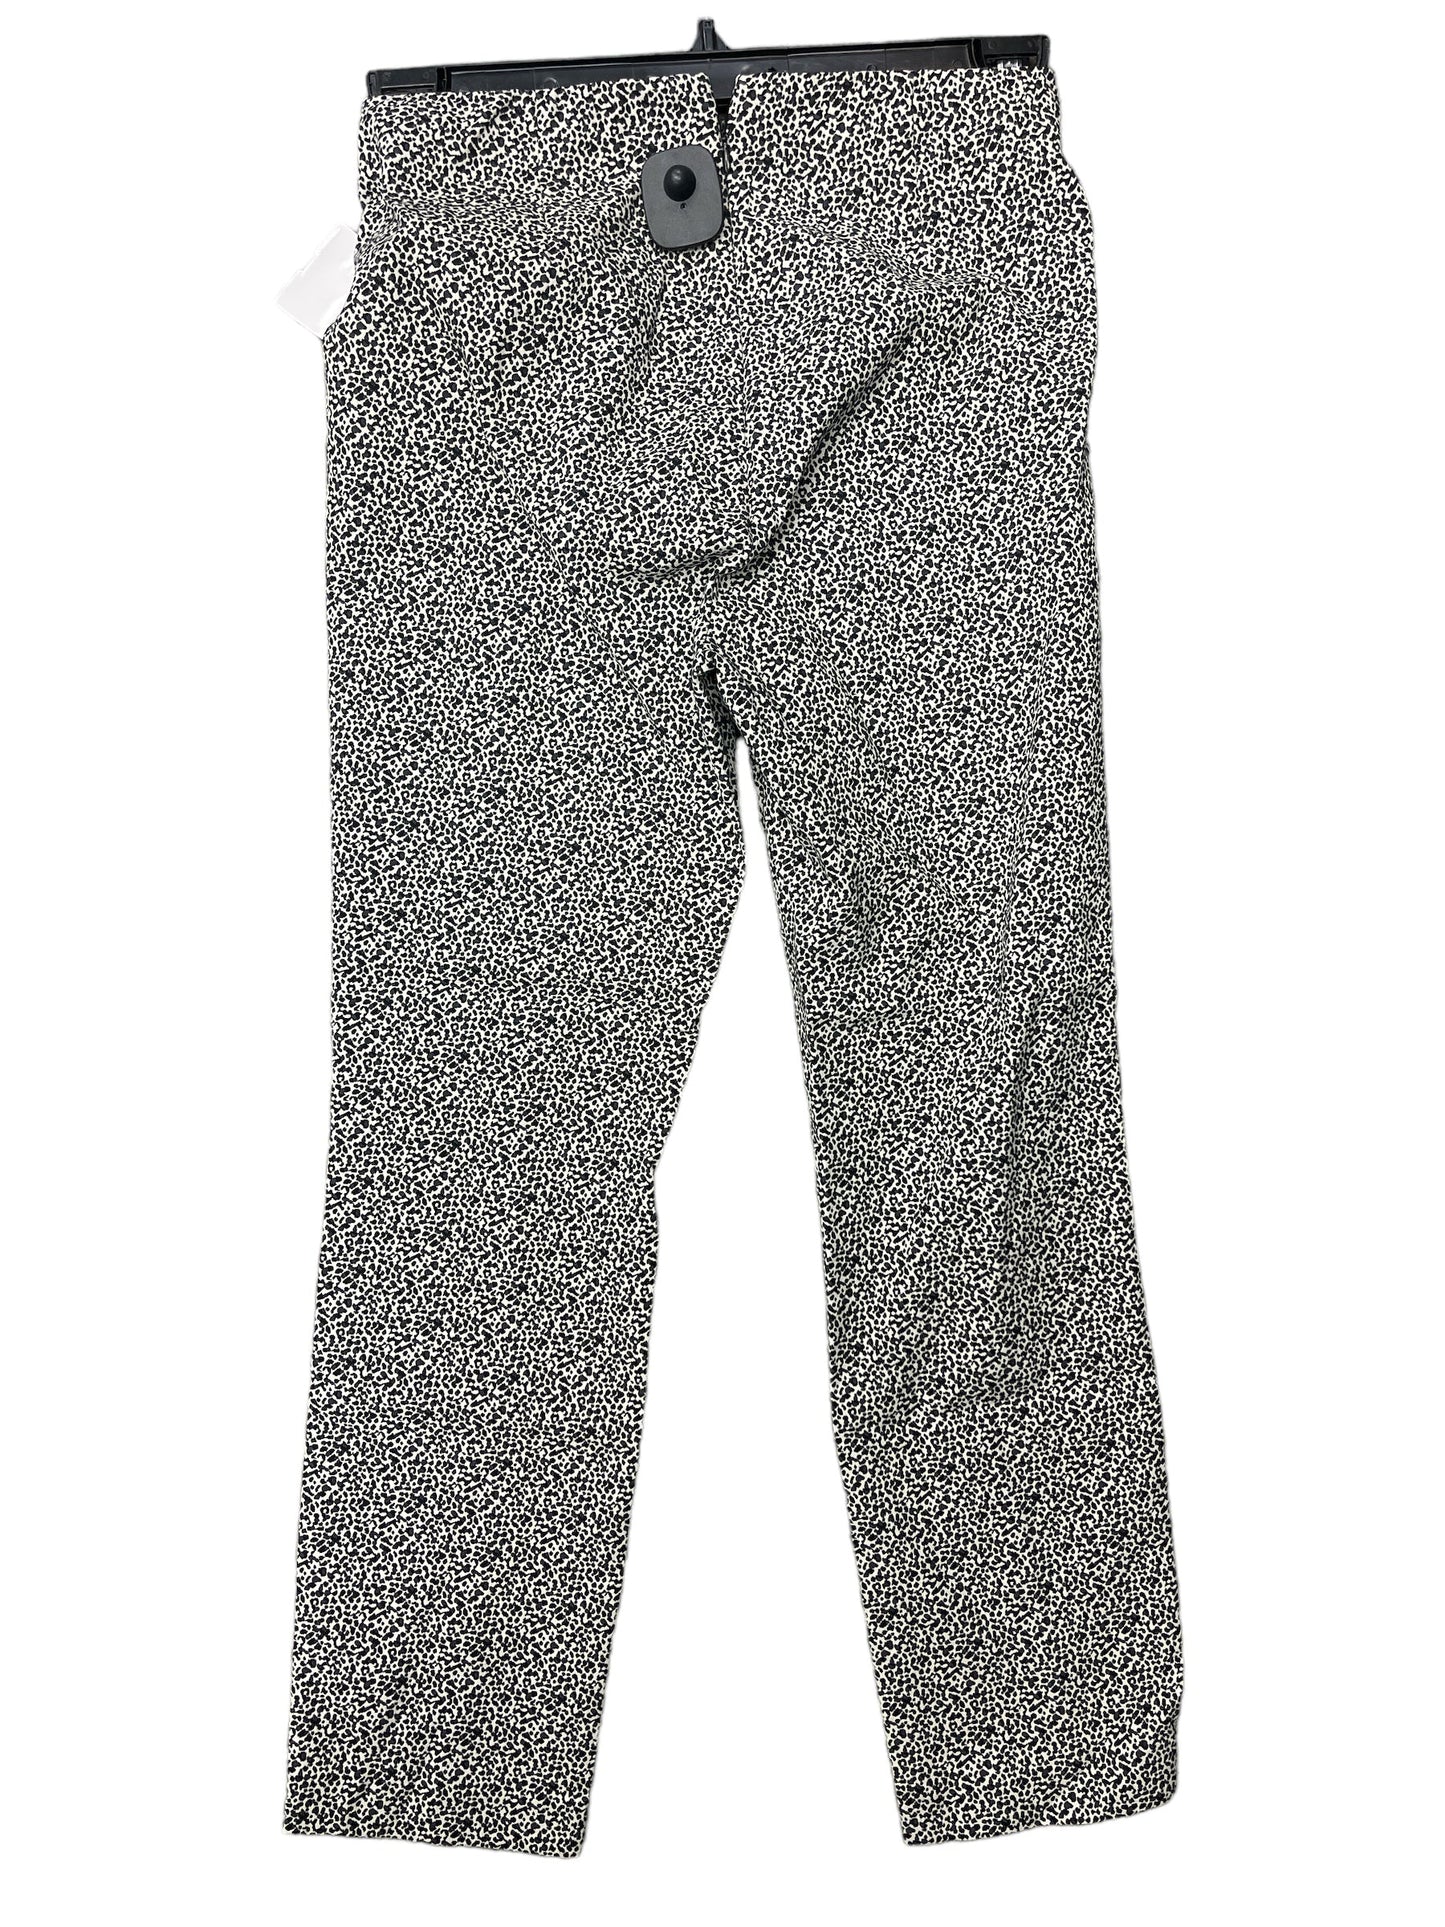 Pants Designer By Rag And Bone  Size: 8